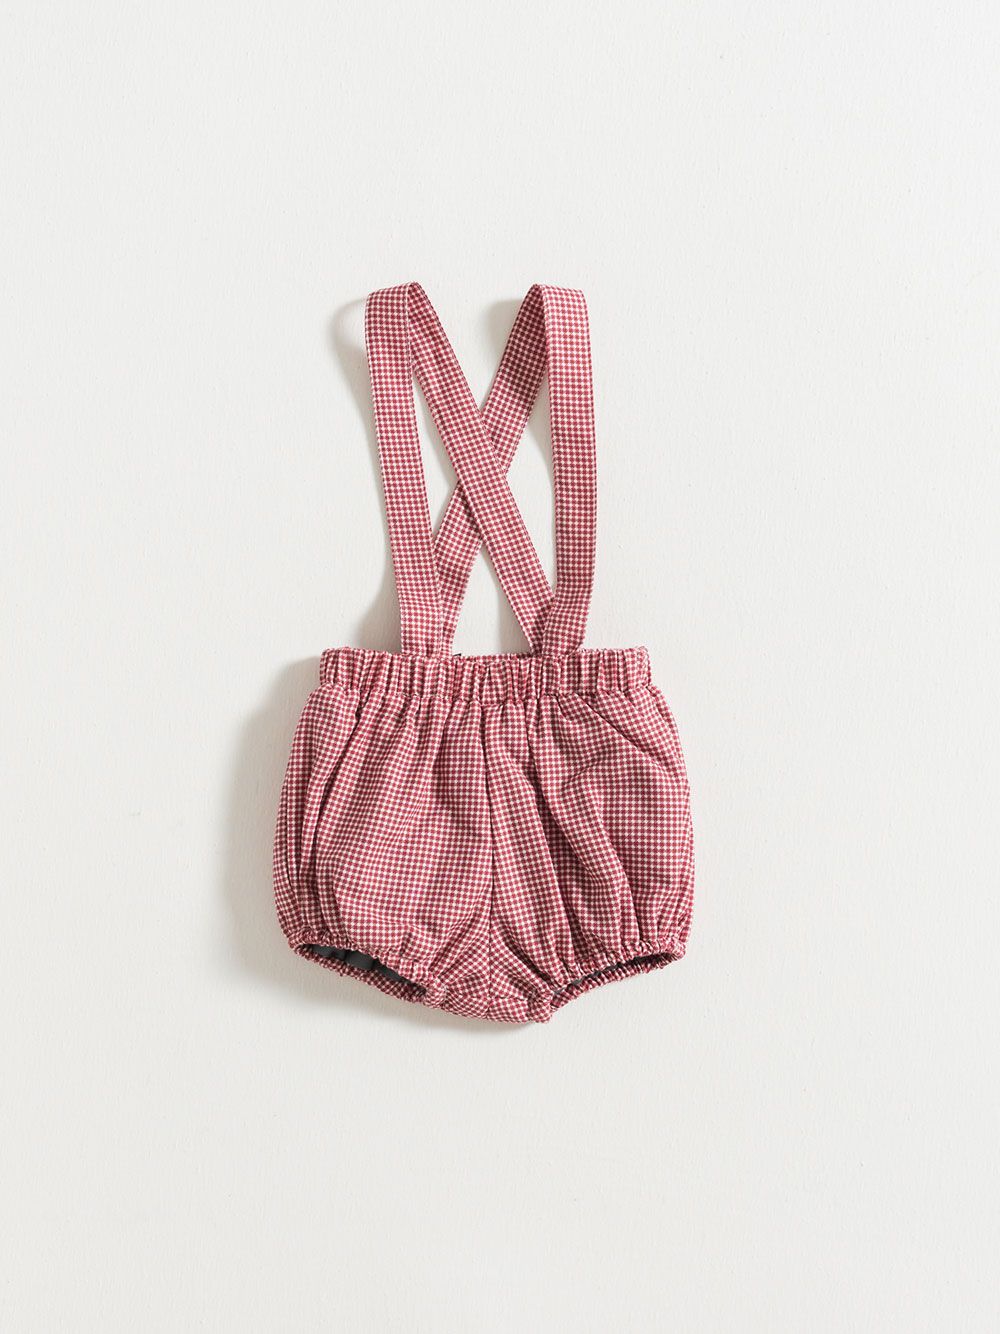 BLOOMER / BURGUNDY | Grace Baby and Child